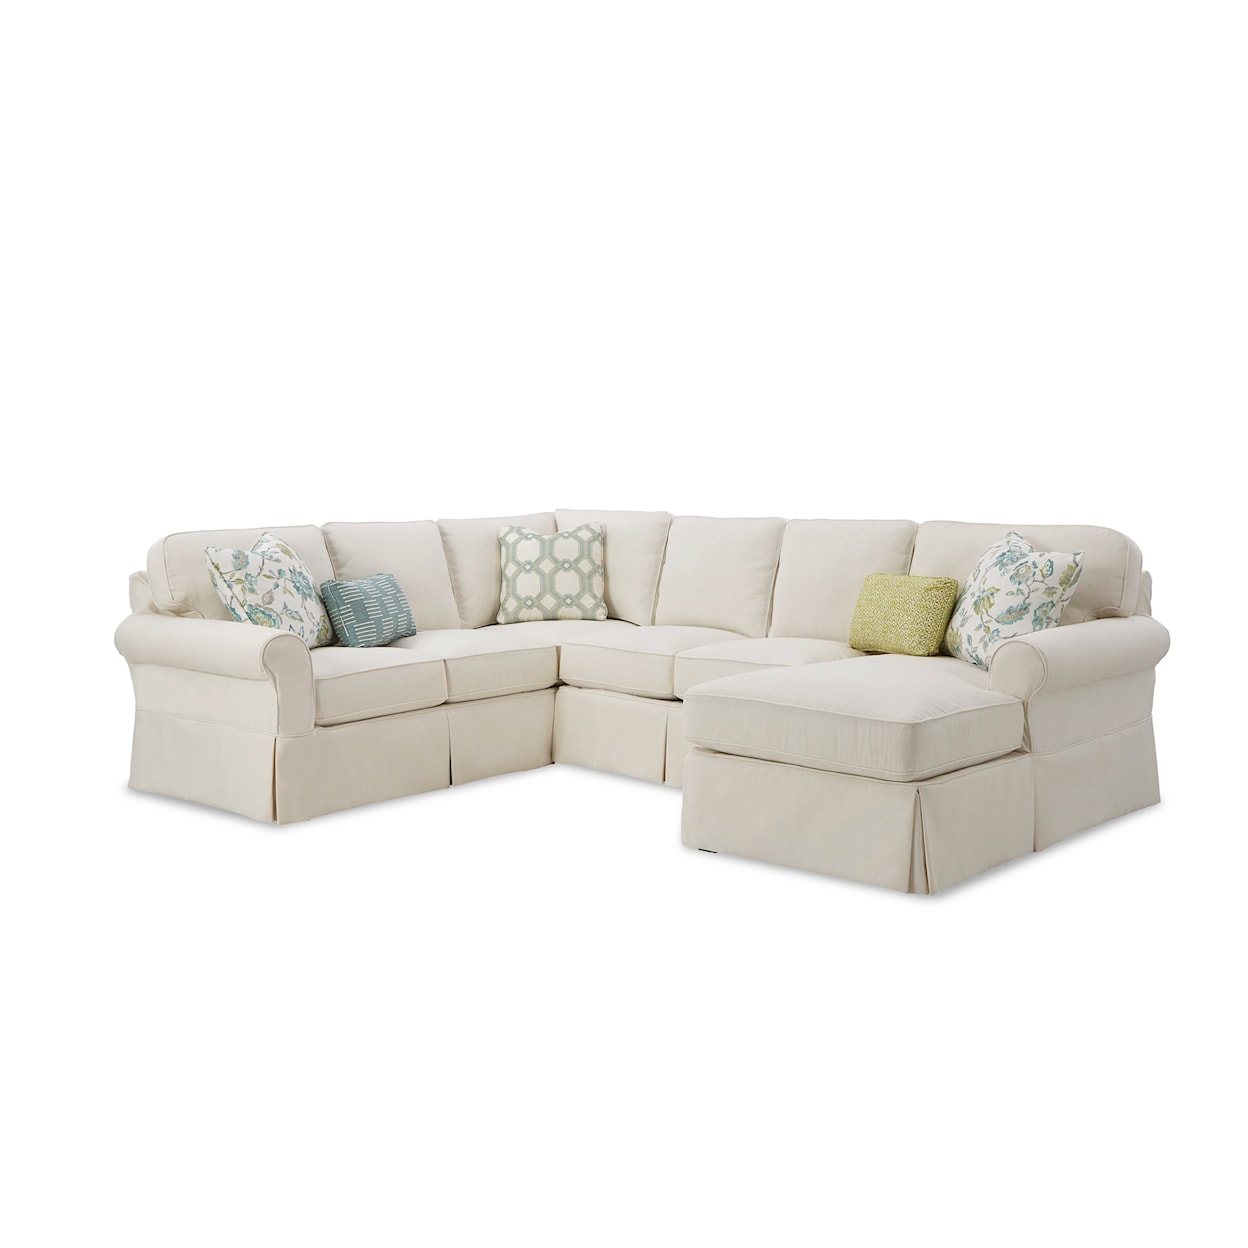 Hickory Craft 917450BD 3-Pc Slipcover Sectional Sofa w/ RAF Chaise